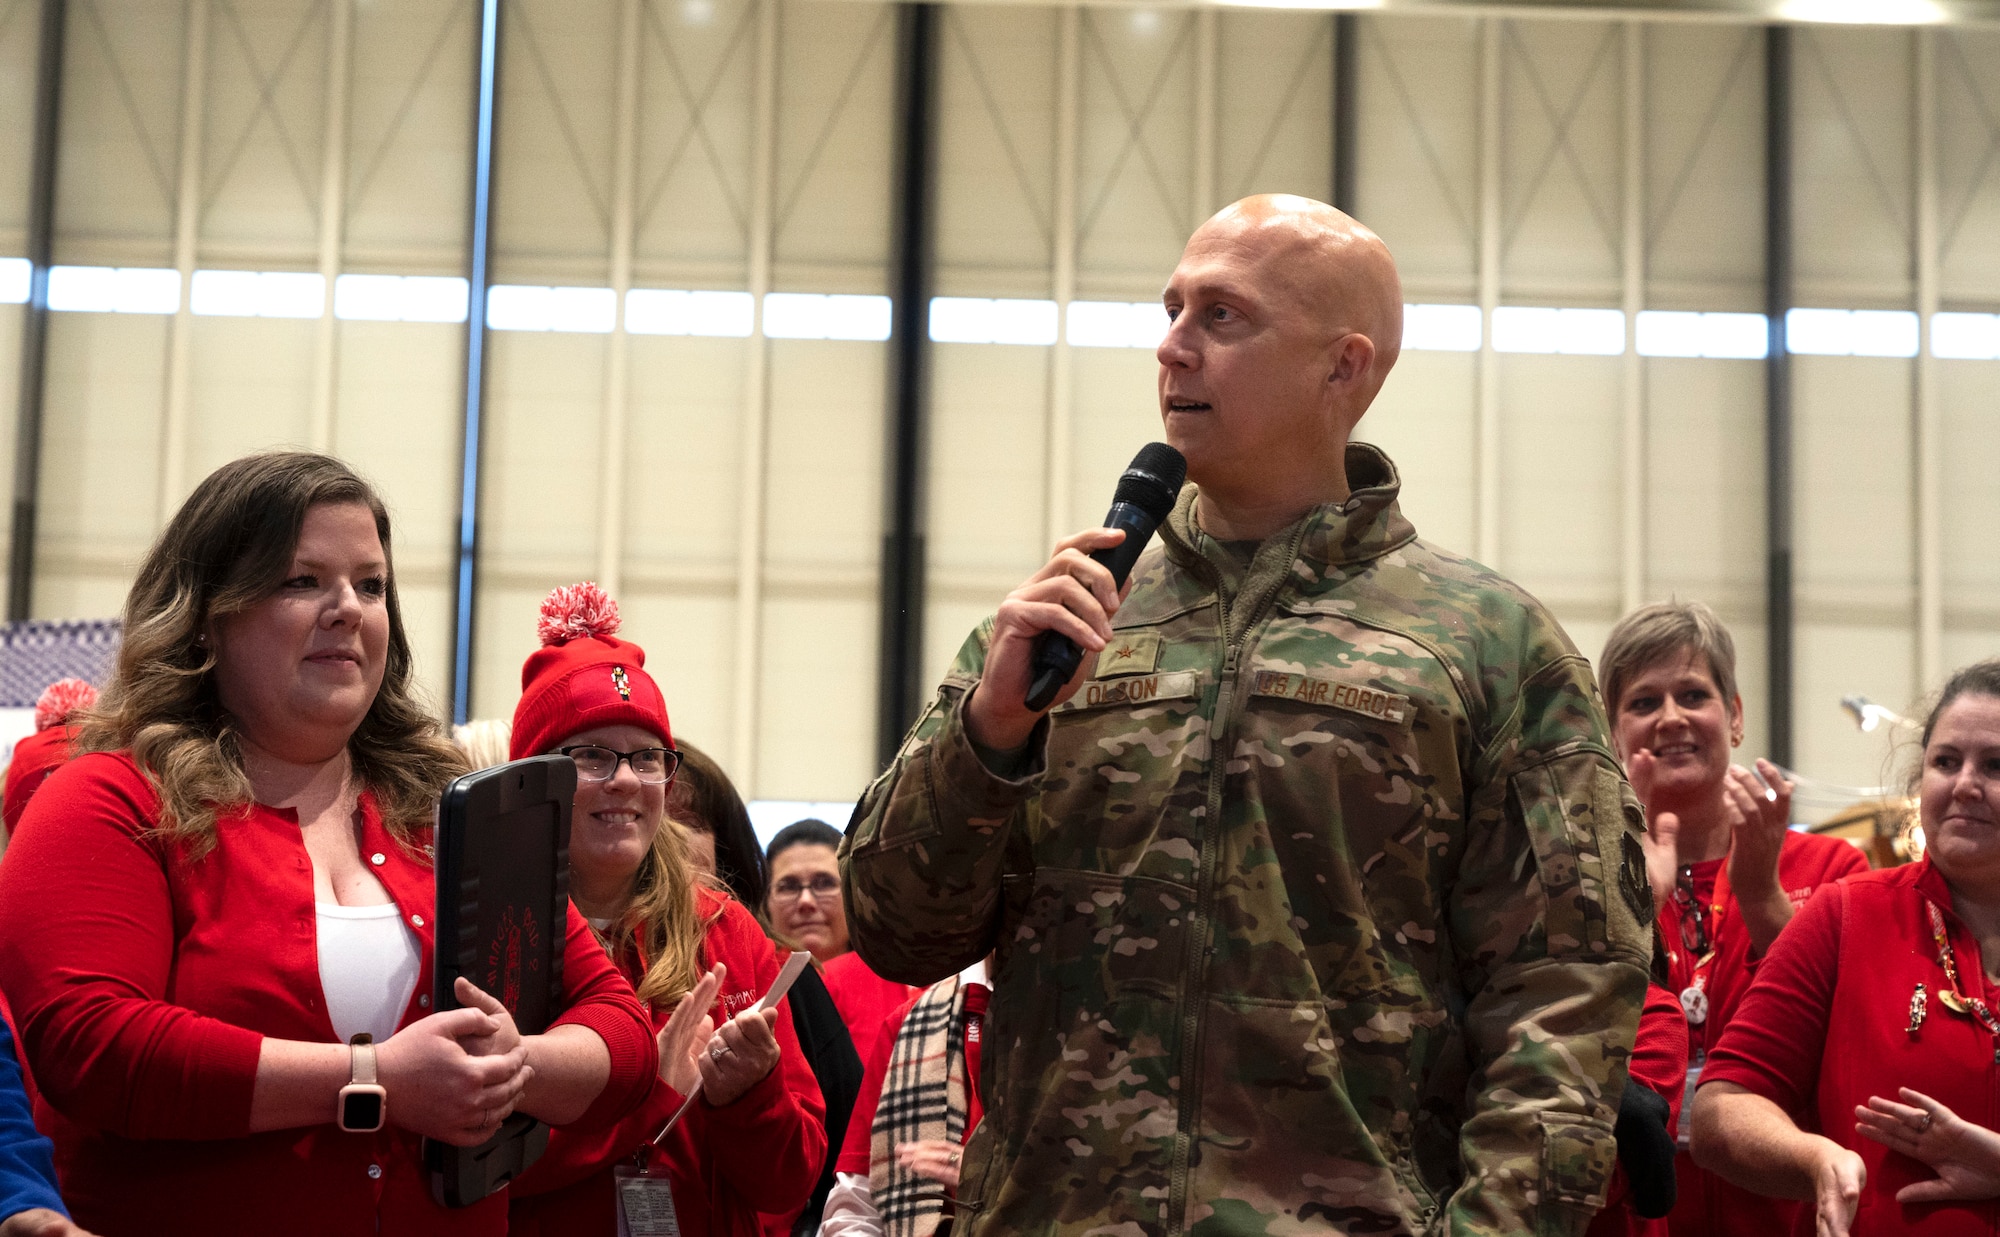 U.S. Air Force Brig. Gen. Joshua Olson, the 86th Airlift Wing commander, speaks at the 57th Annual Ramstein Bazaar, at Ramstein Air Base, Germany, Oct. 20, 2021. The Ramstein Bazaar is an event, which brings the local community together to kick off the holiday season. (U.S. Air Force photo by Senior Airman Thomas Karol)